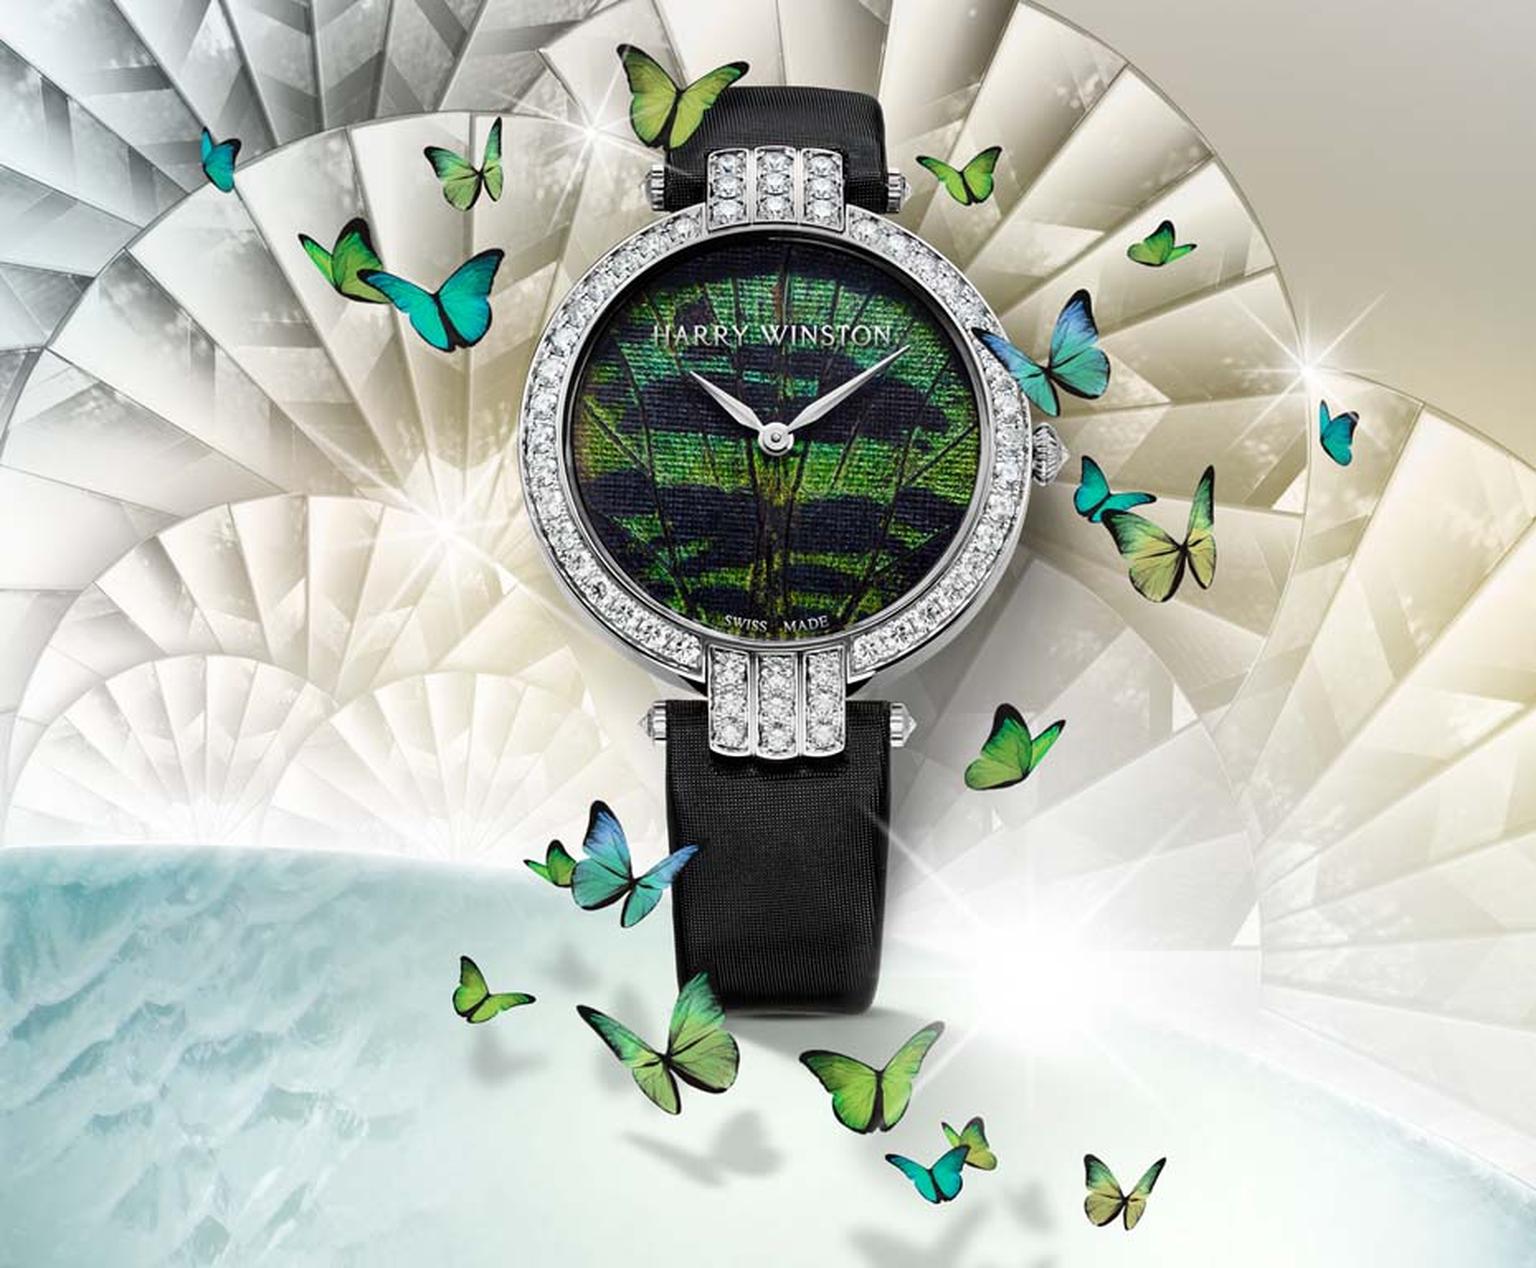 Butterfly Watches Harry Winston Premier Precious Butterfly 36mm Automatic Watch   1536x0 Q75 Crop Scale Subsampling 2 Upscale False 